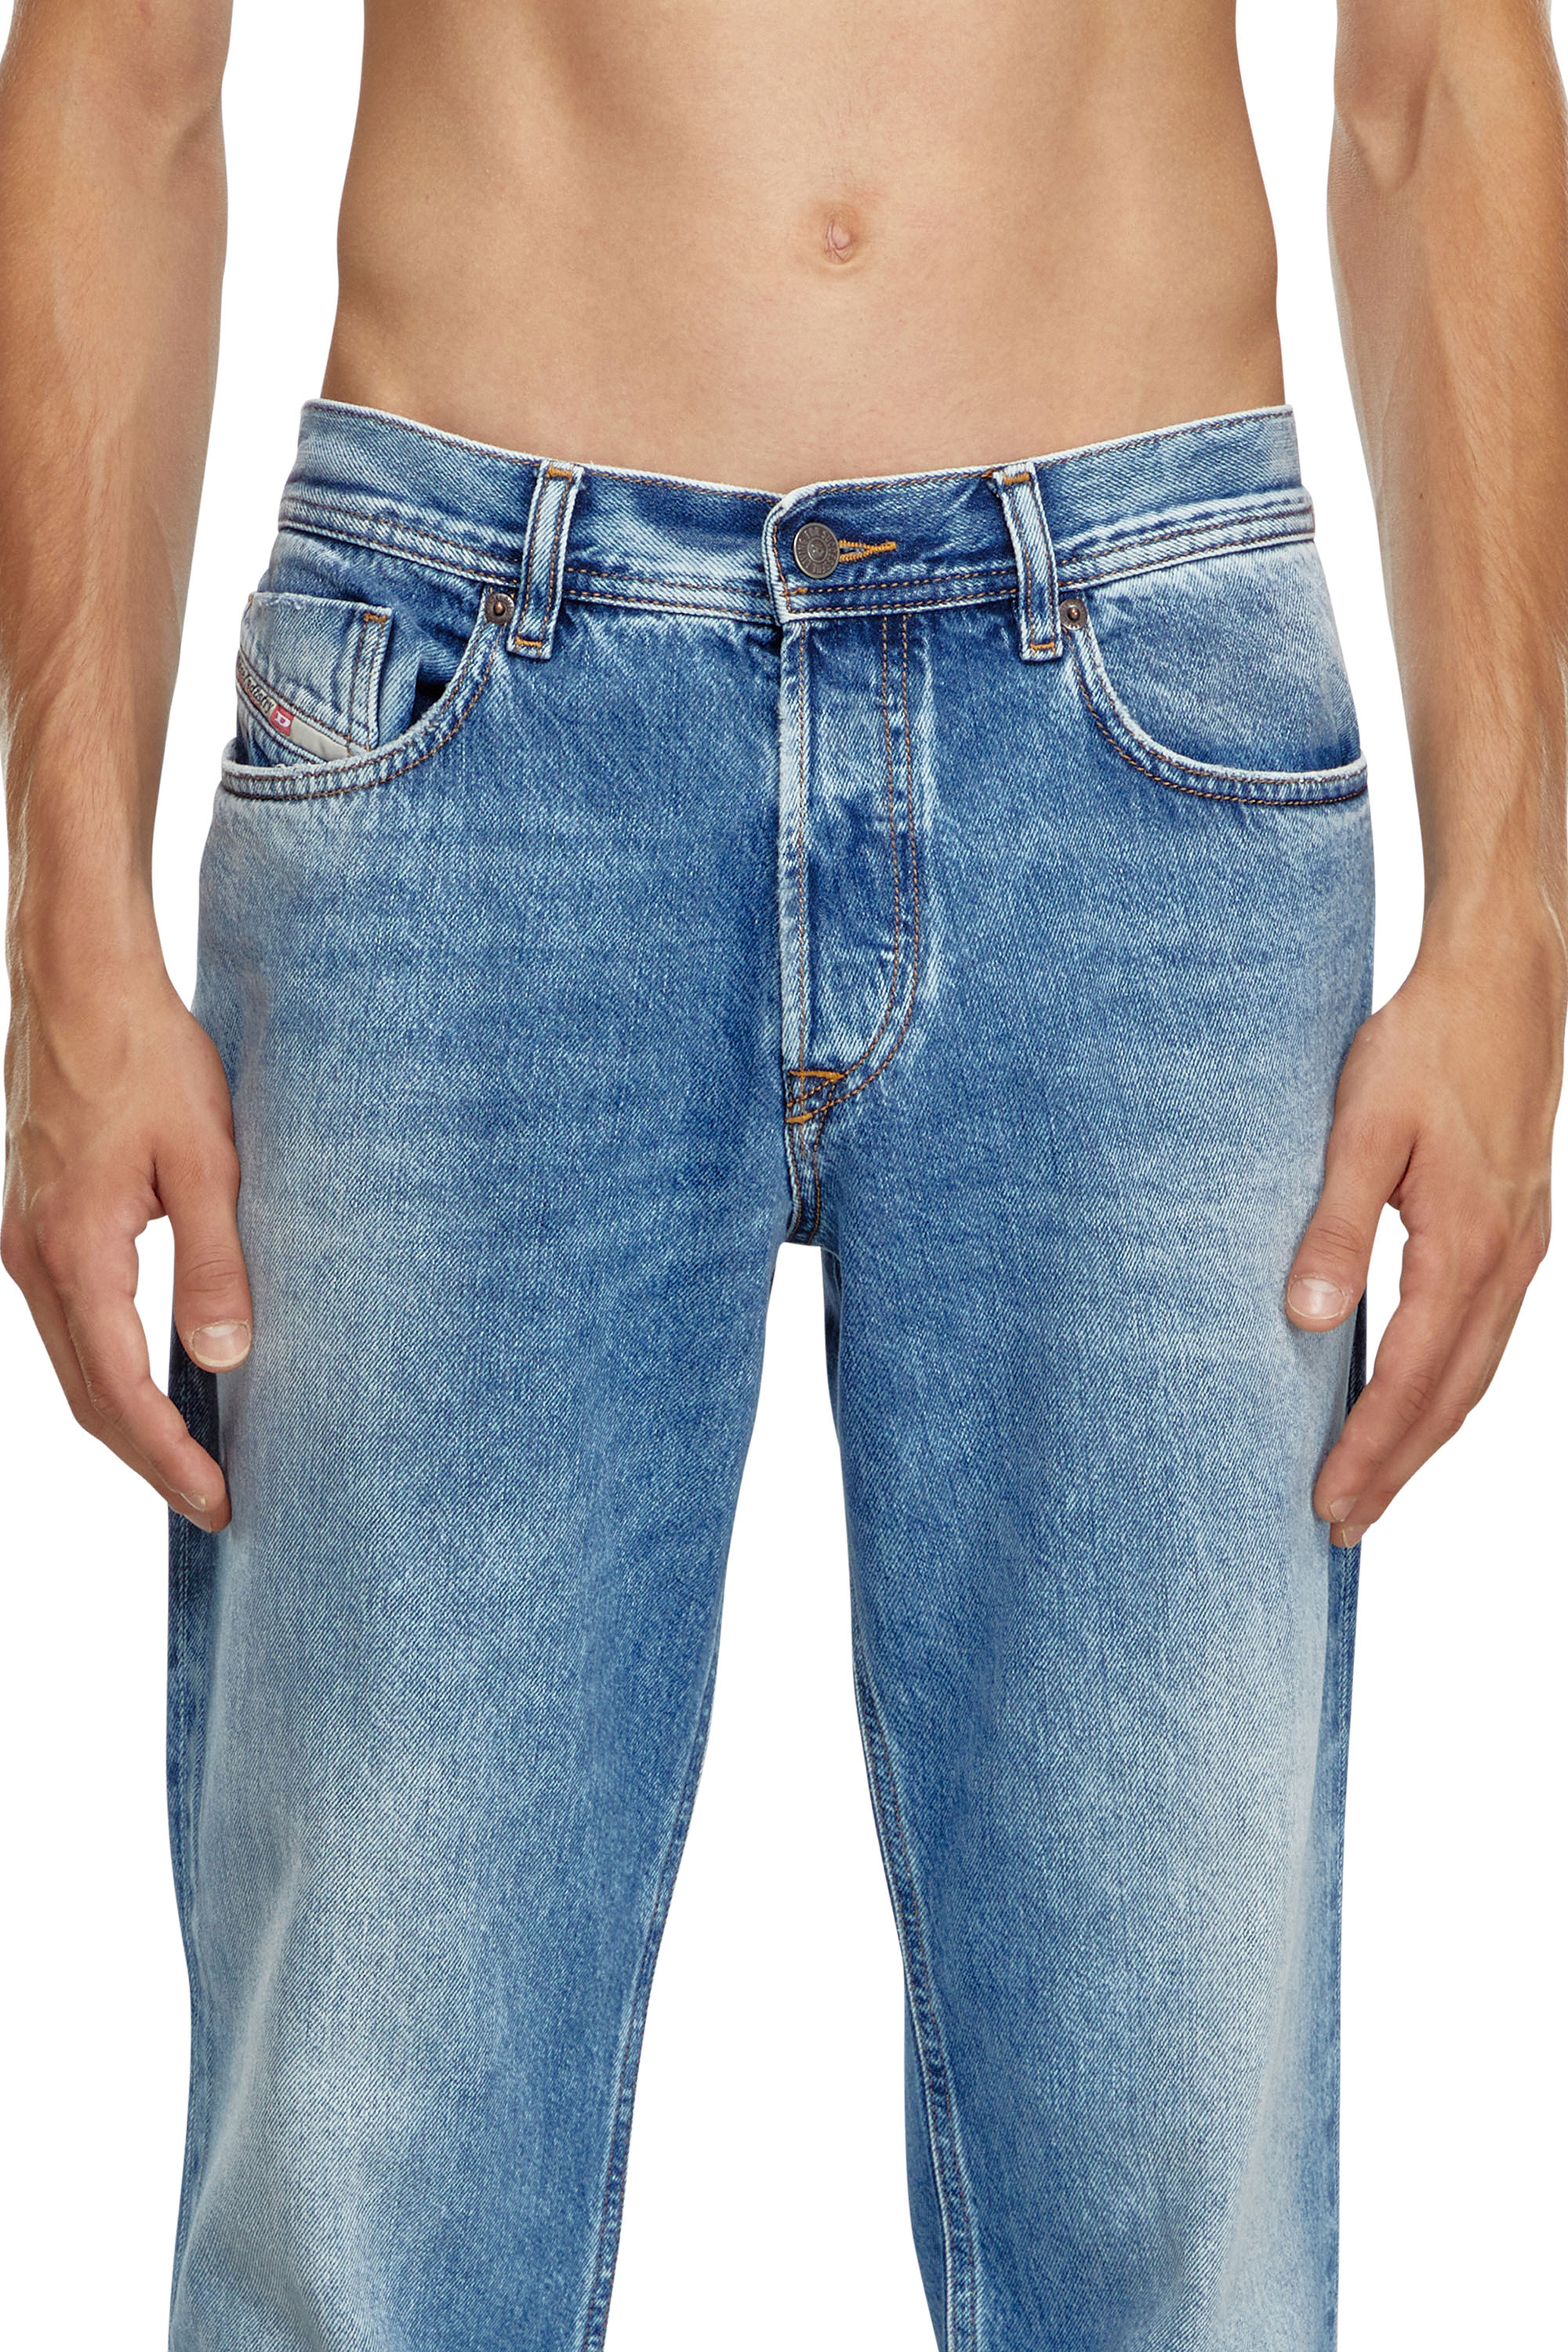 Diesel - Tapered Jeans 2023 D-Finitive 09H95, Hombre Tapered Jeans - 2023 D-Finitive in Azul marino - Image 4